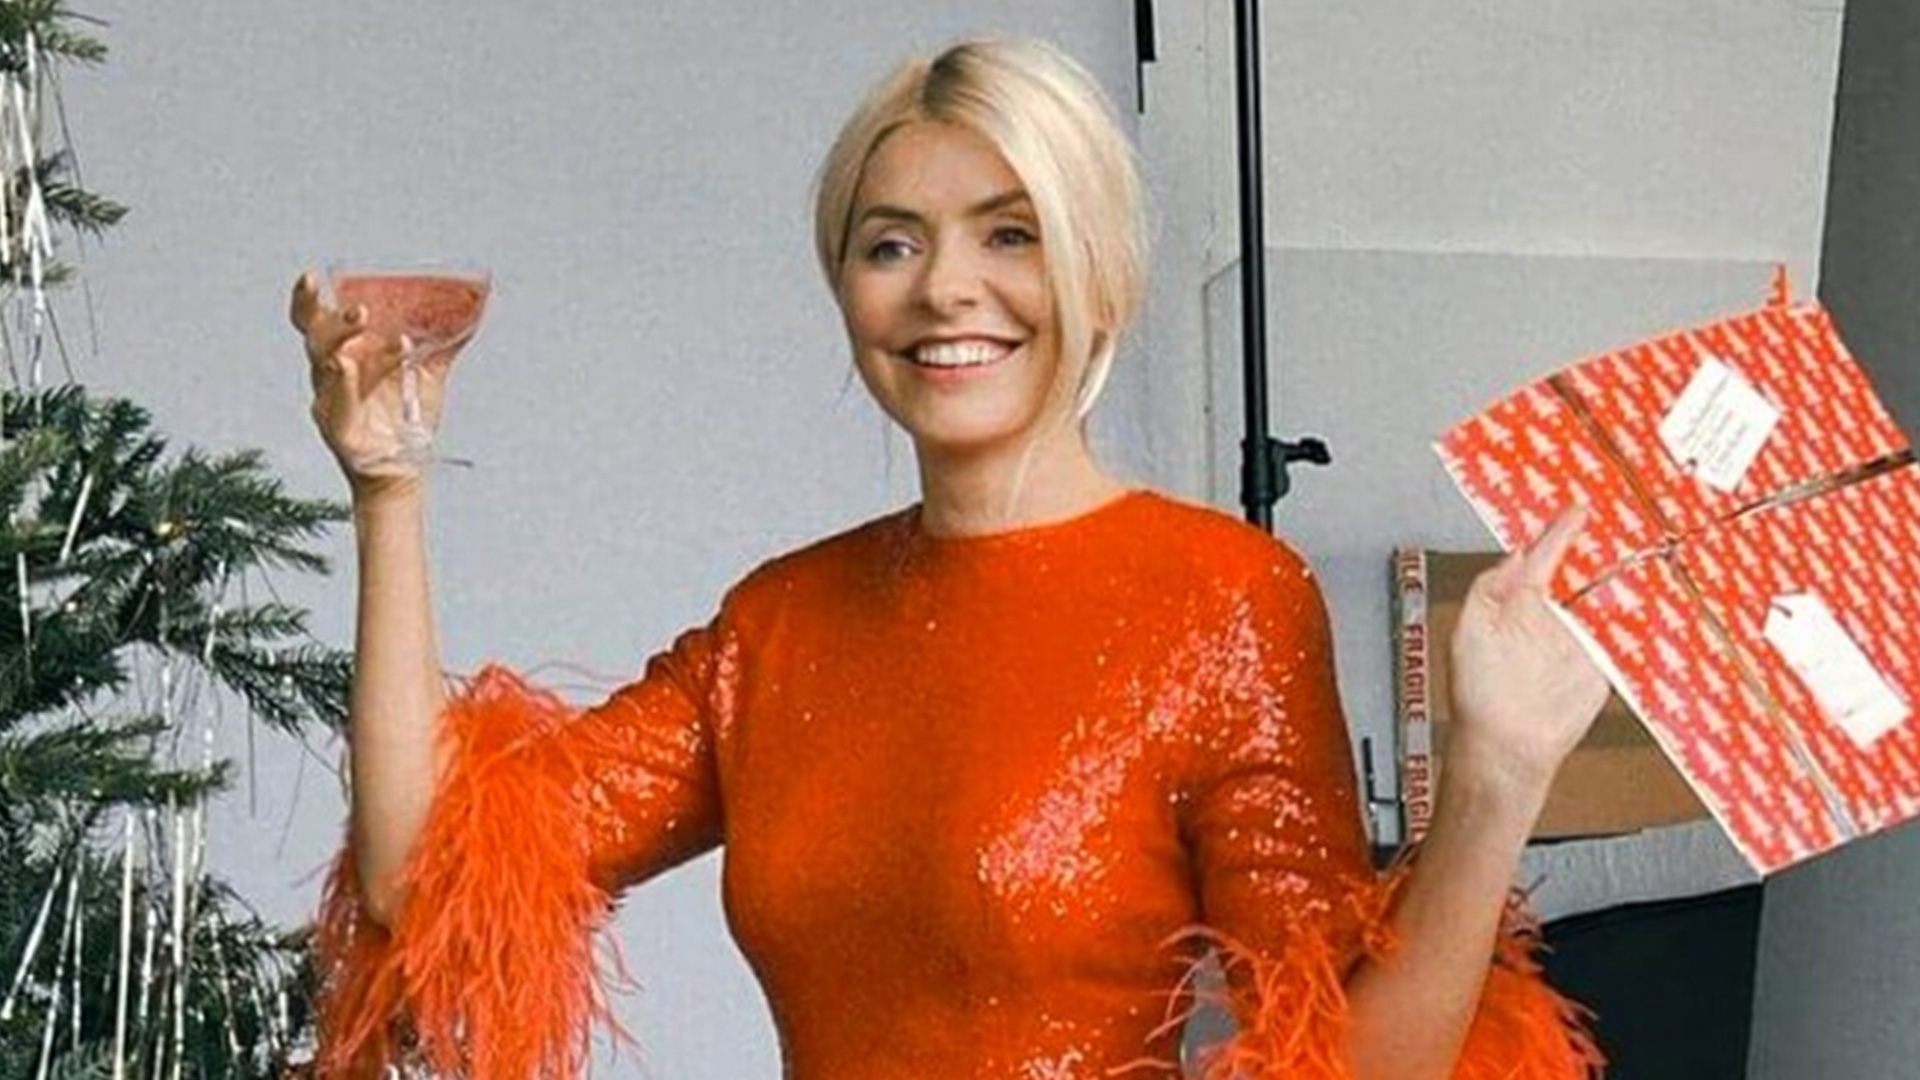 Holly Willoughby has a Christmas Makeover: She shows off her tanned legs with a red minidress that sparkles in the sunlight.